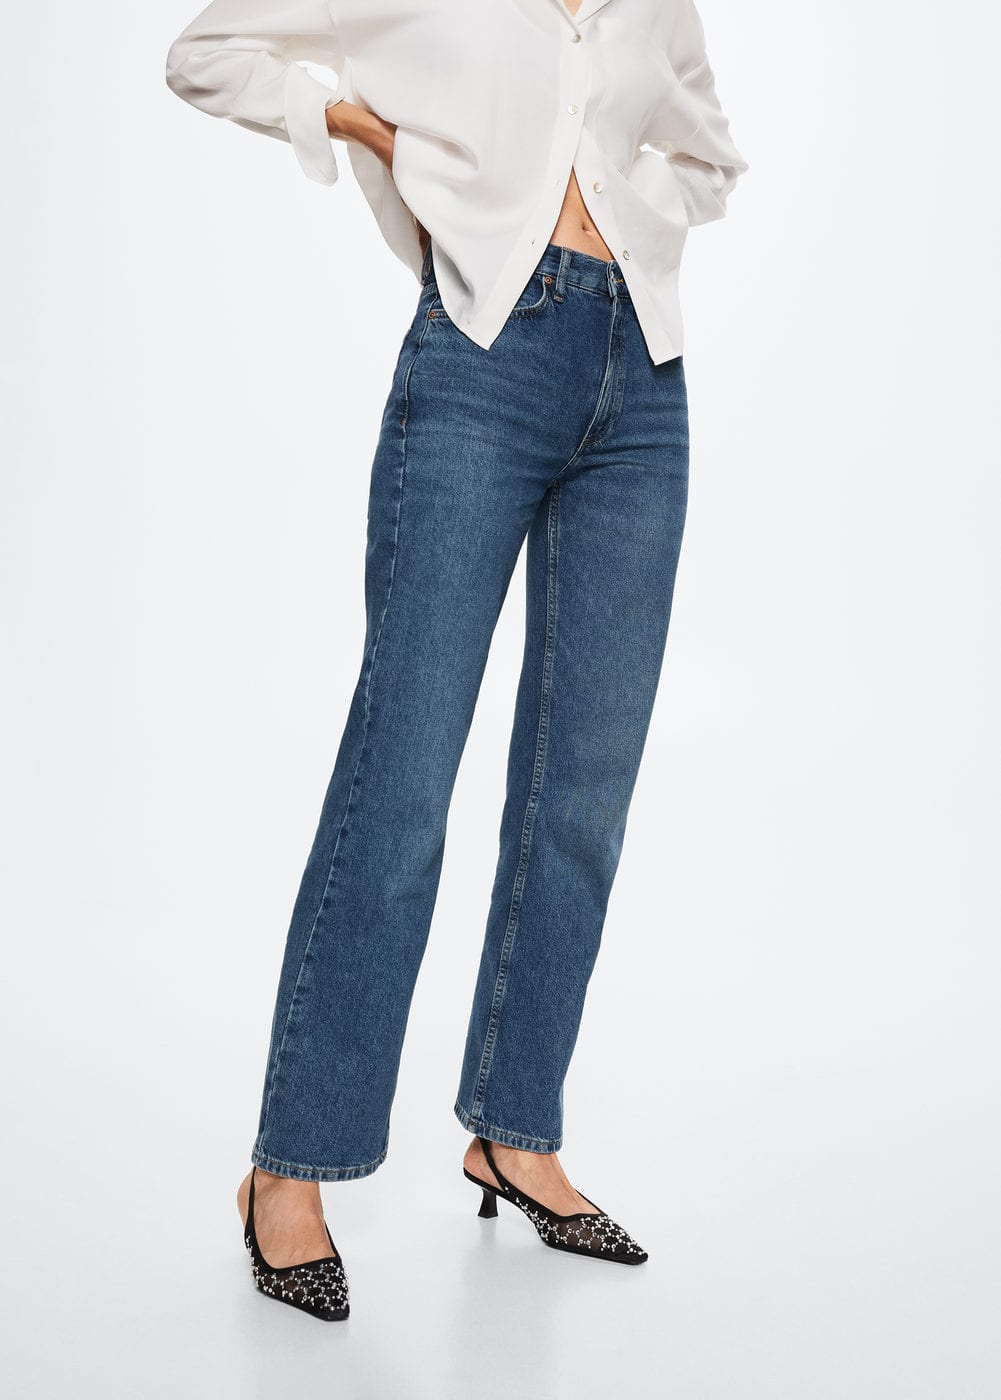 8 Best Straight-Leg Jeans For Midsize Girls With Hips | Who What Wear UK